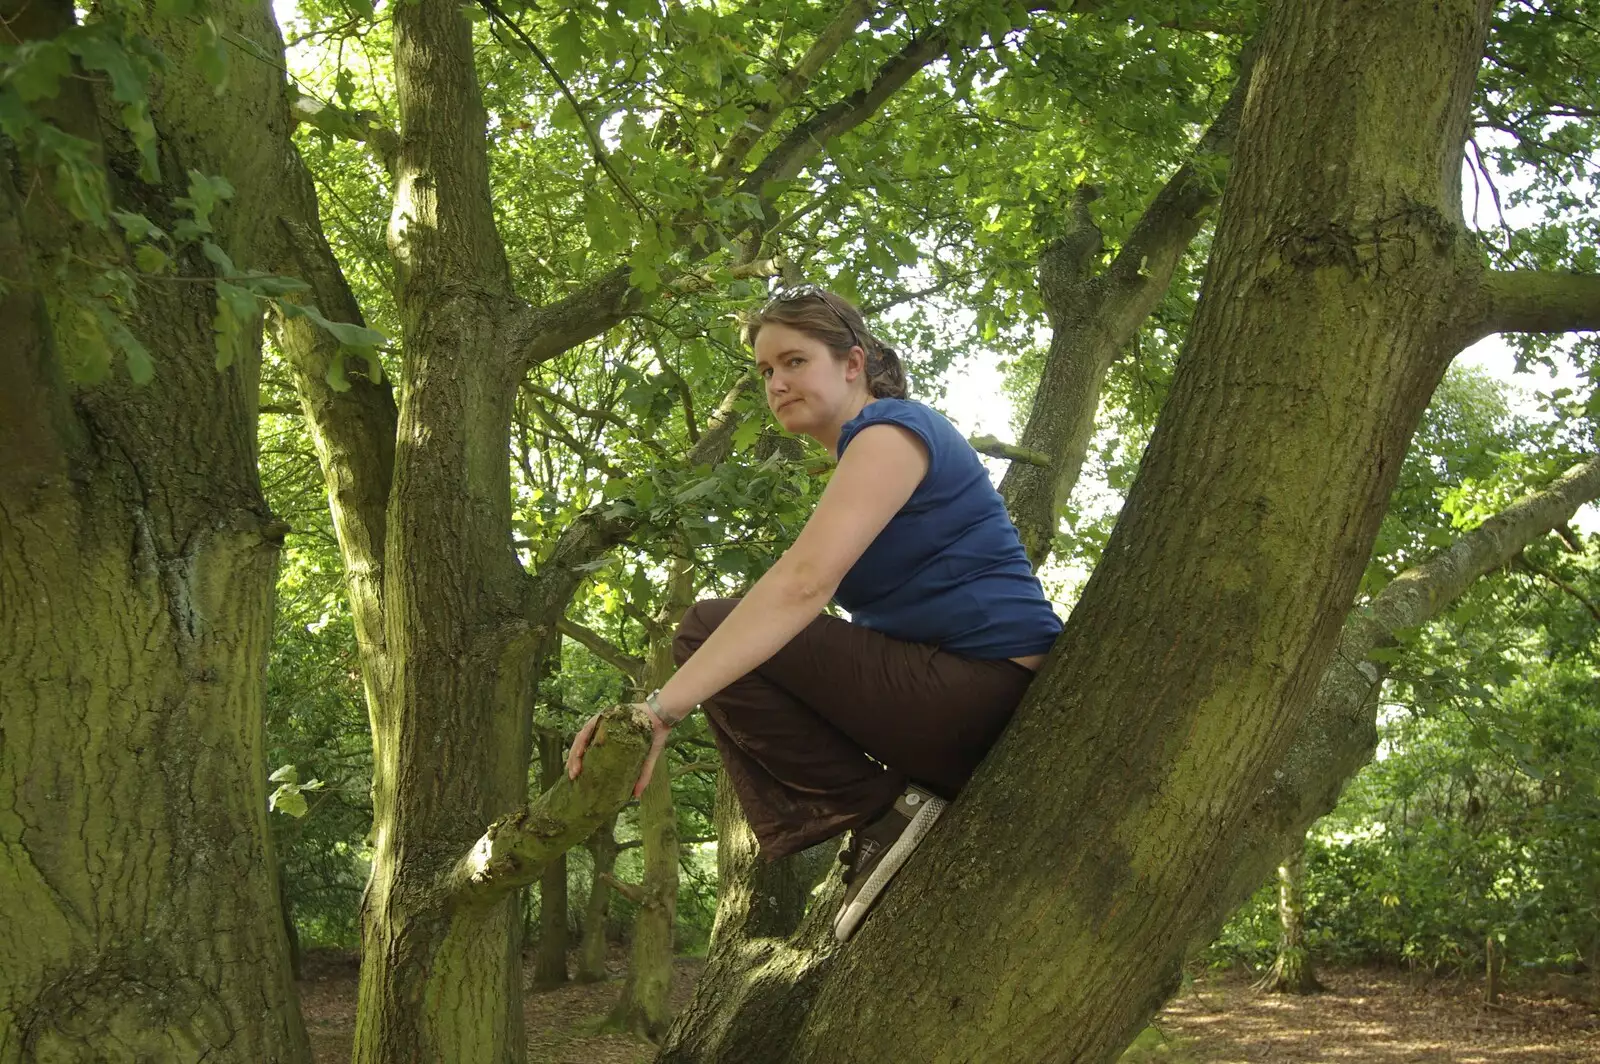 Isobel climbs a tree, from A Picnic on The Ling, Wortham, Suffolk - 26th August 2007